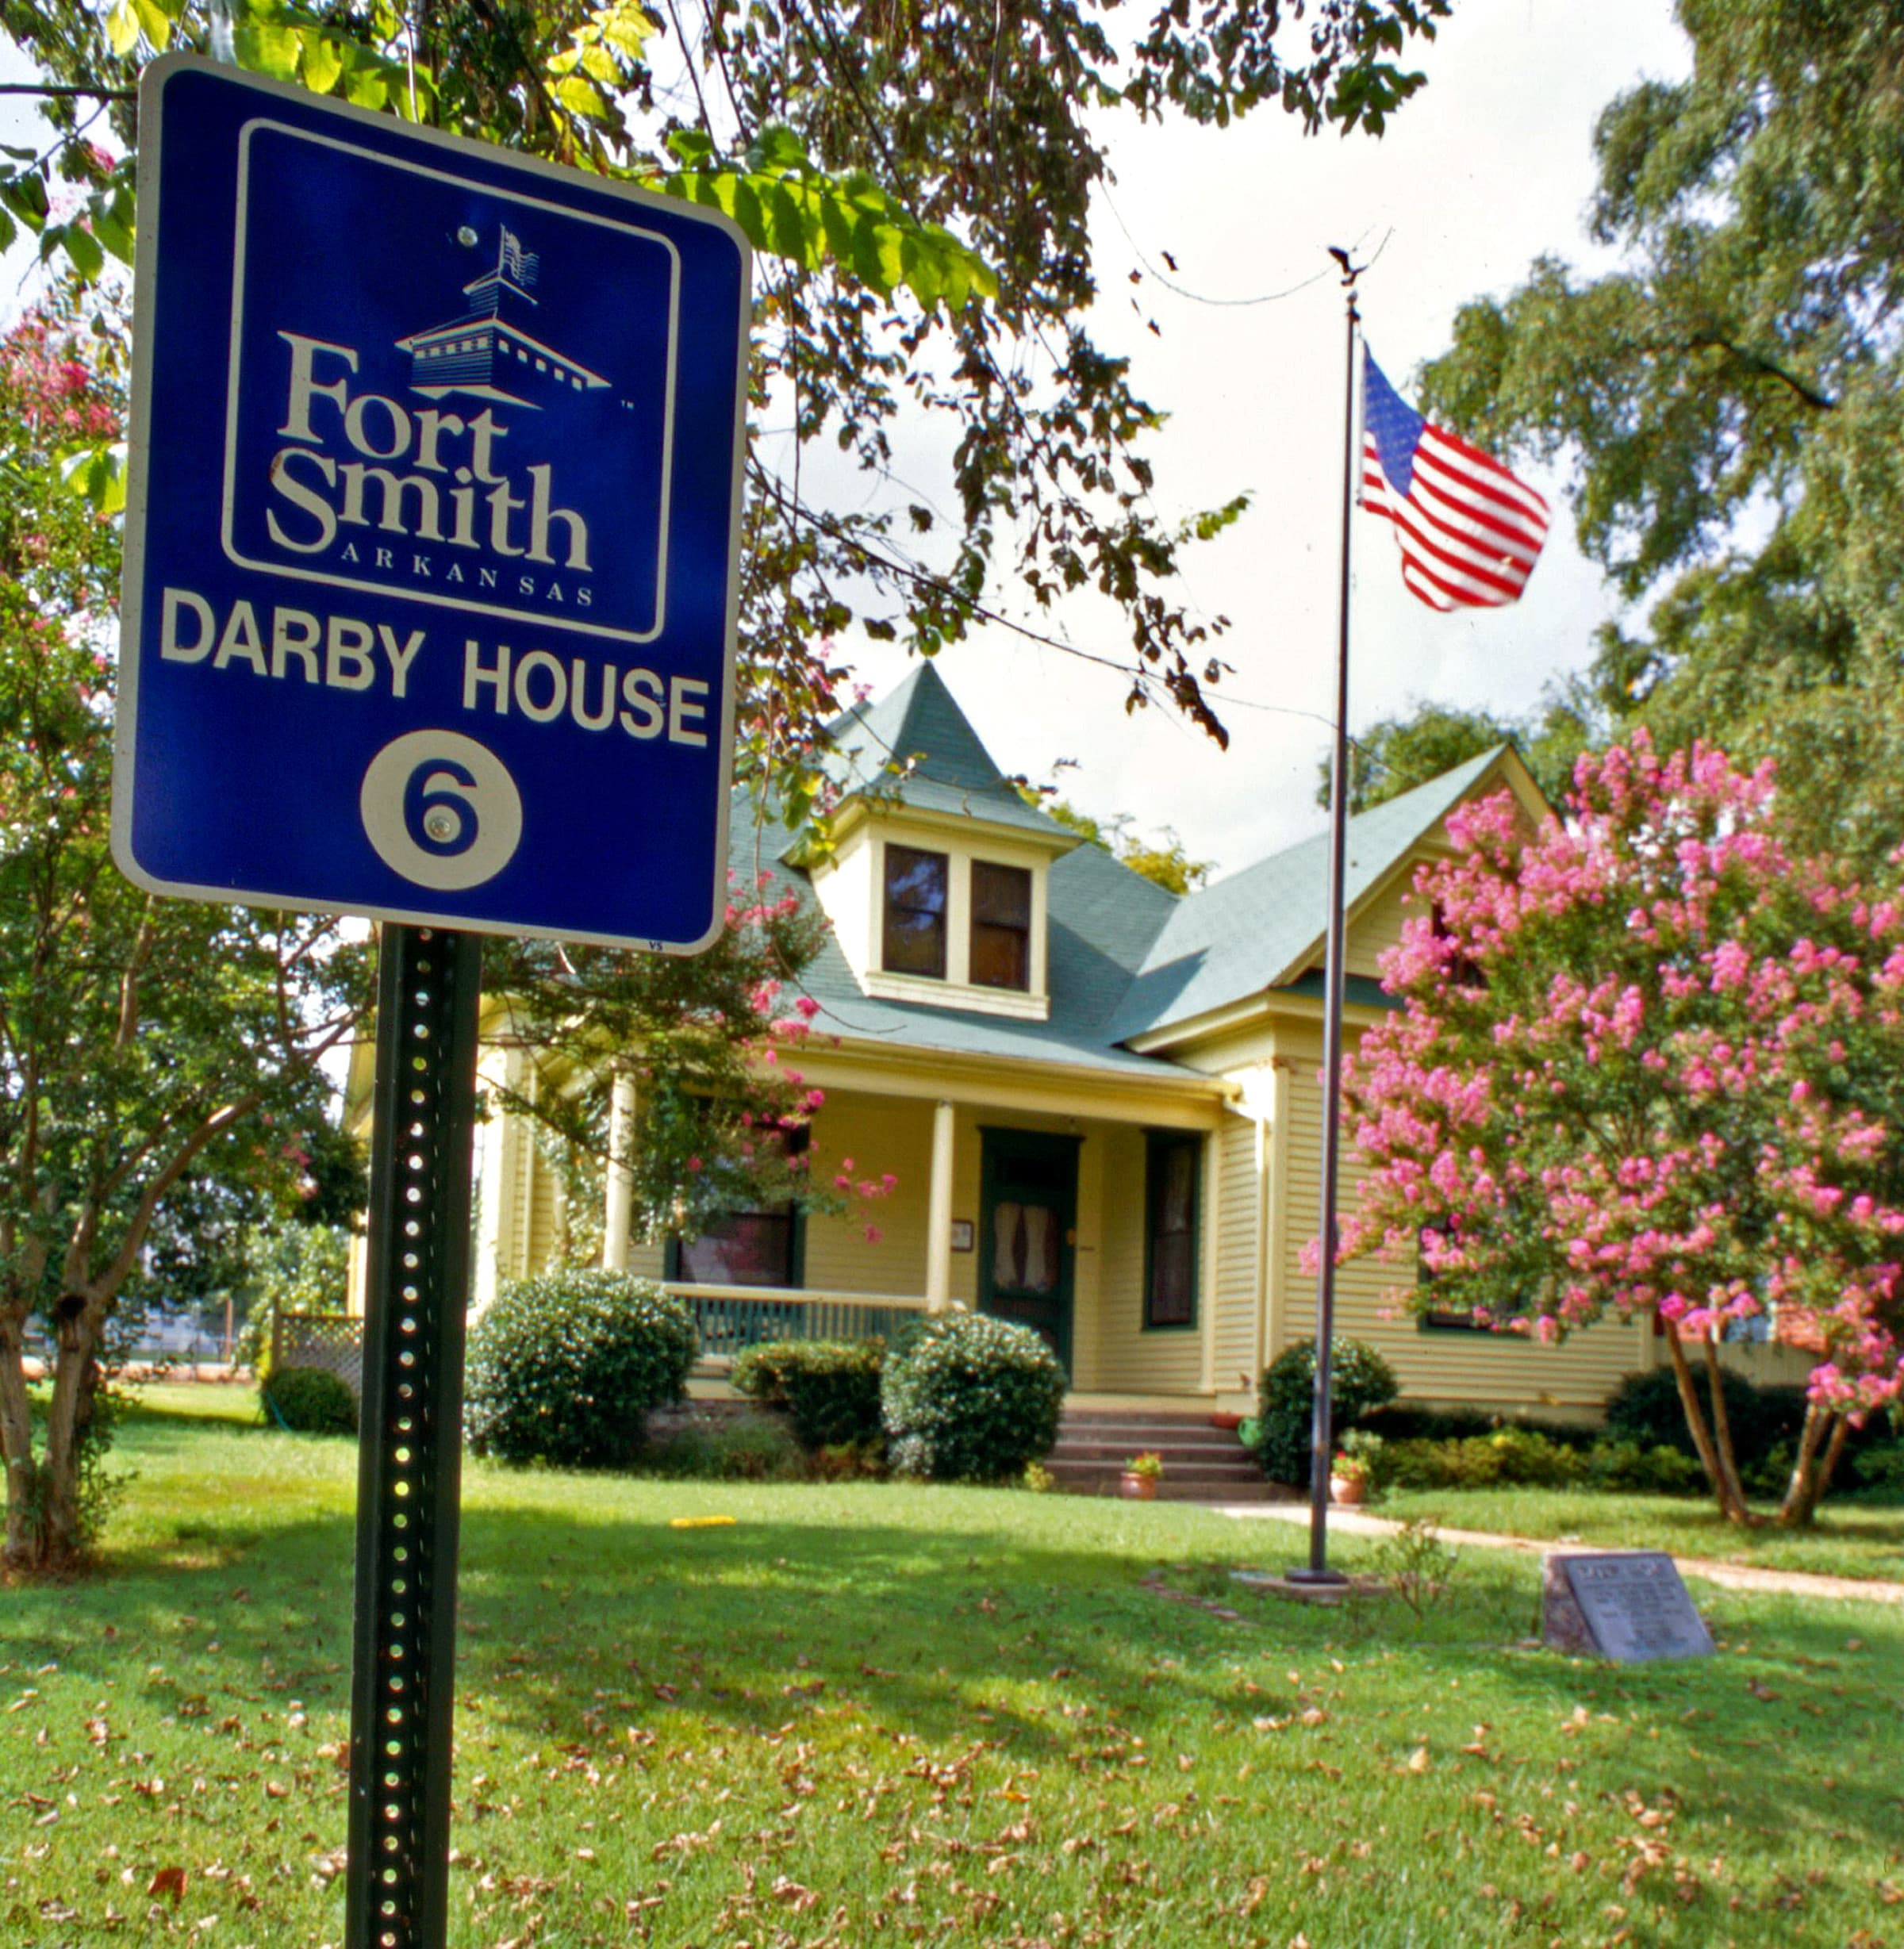 Fort Smith Darby House Museum